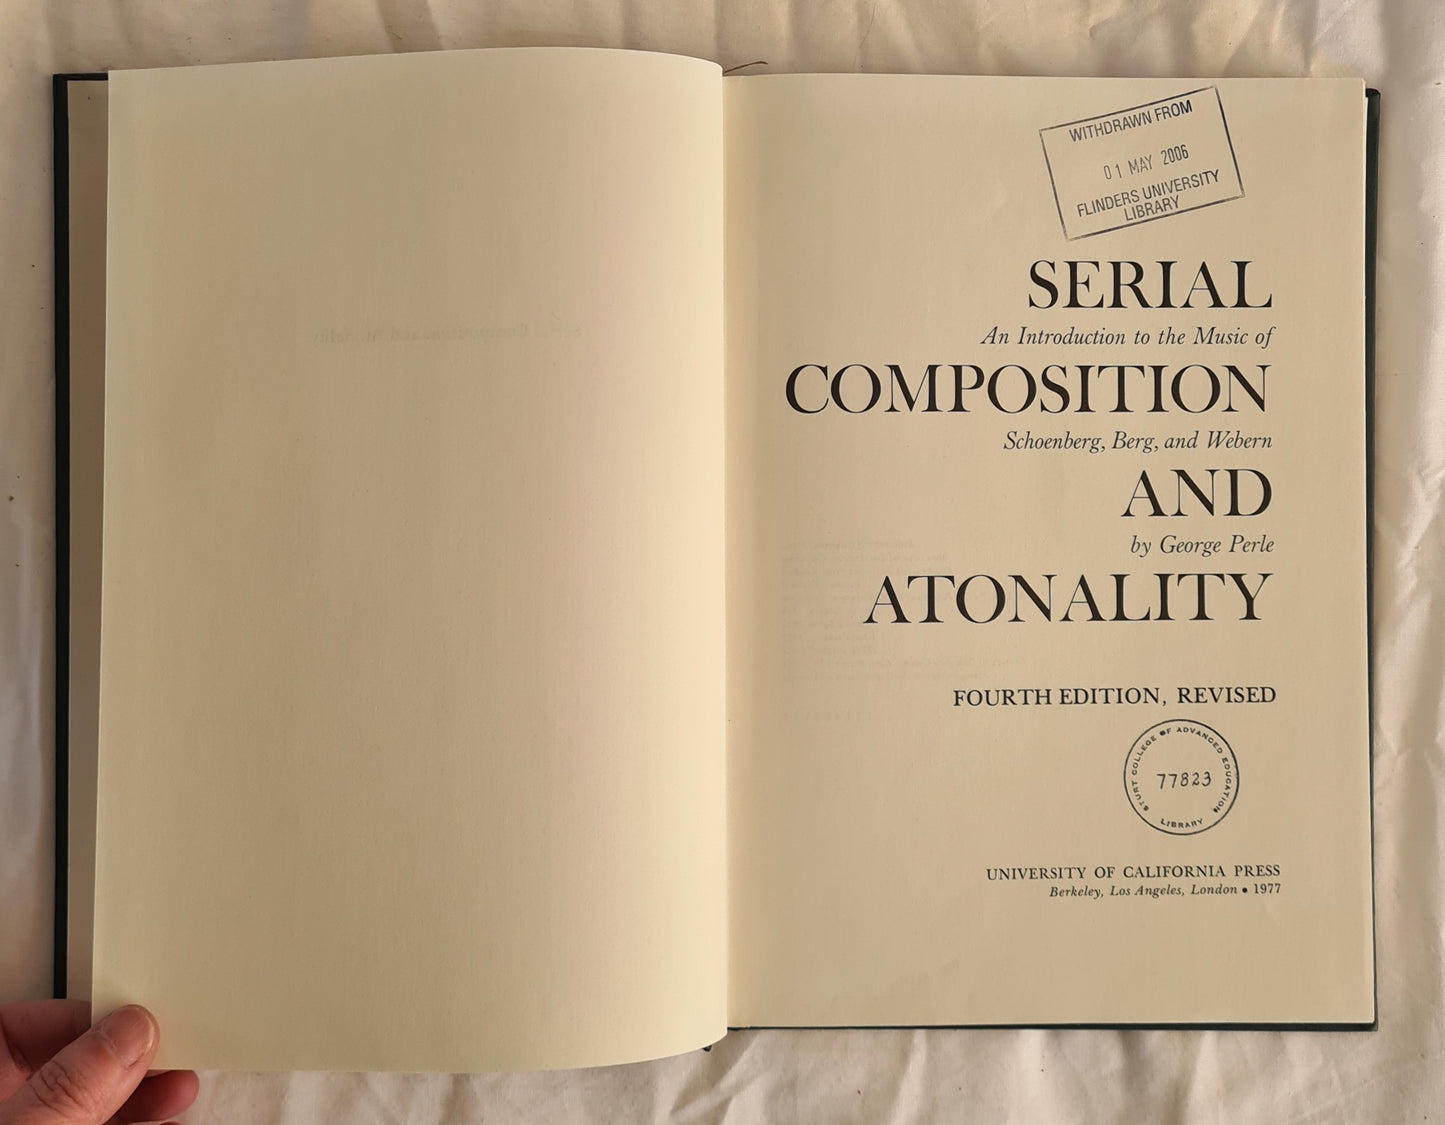 Serial Composition and Atonality by George Perle